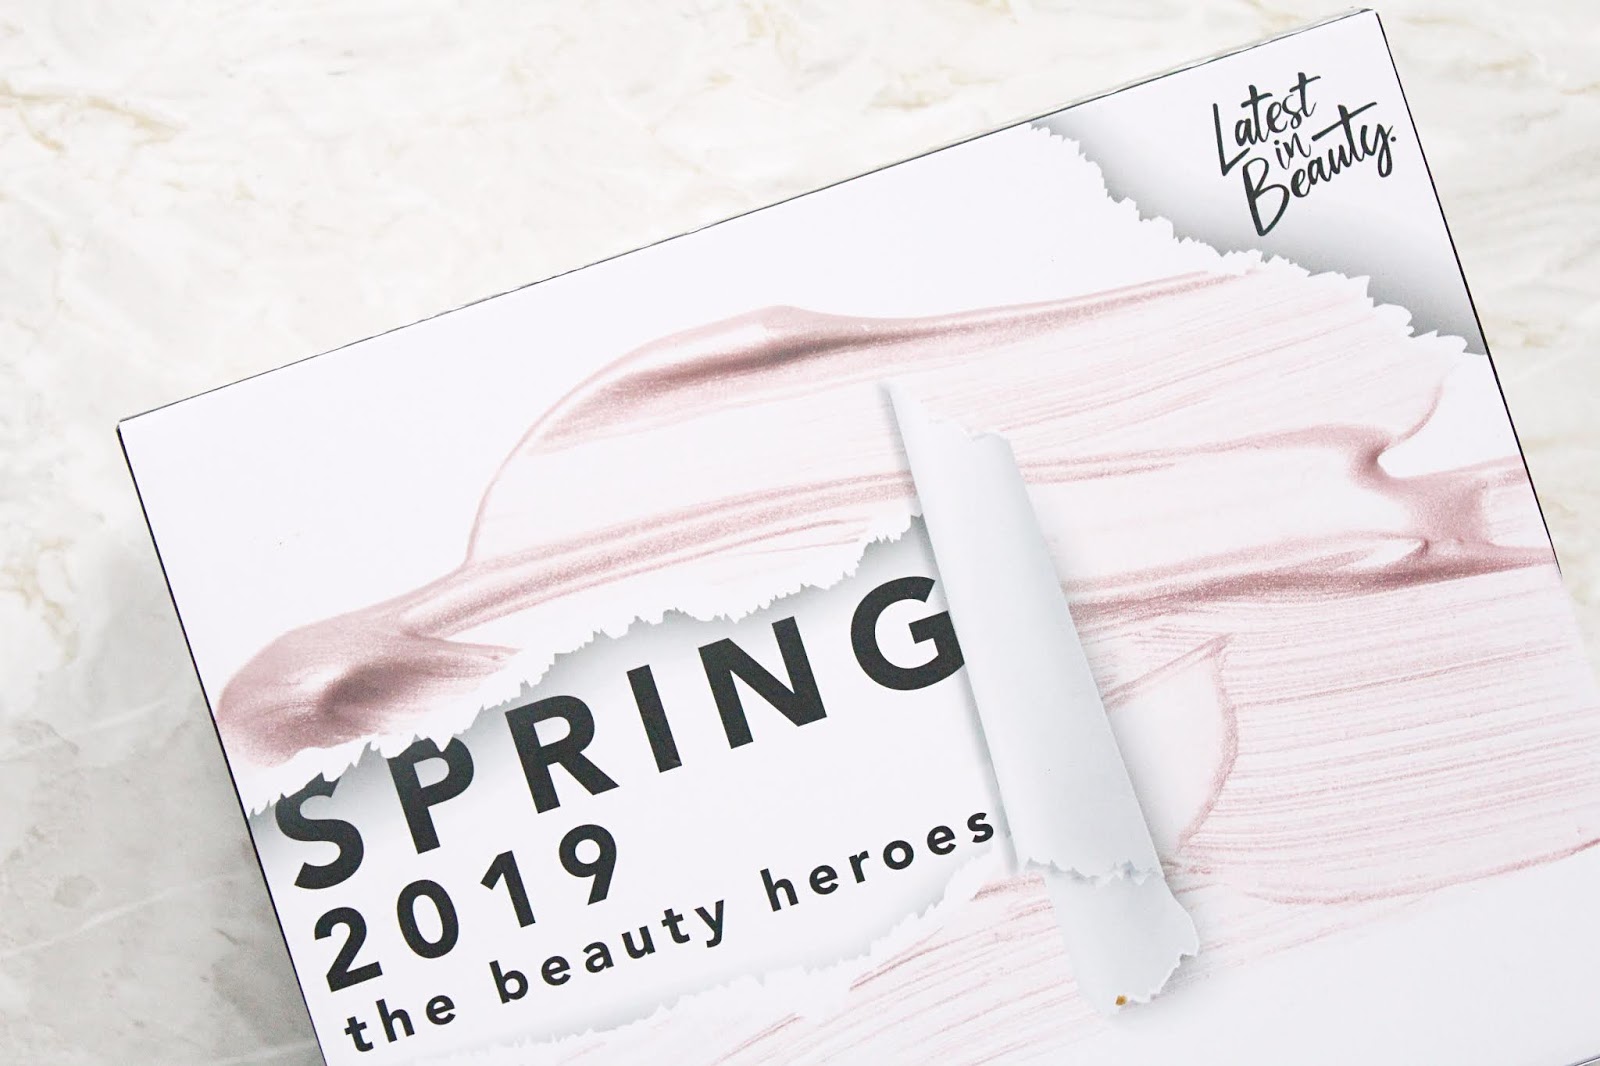 Latest in Beauty Spring 2019 The Beauty Heroes Box 